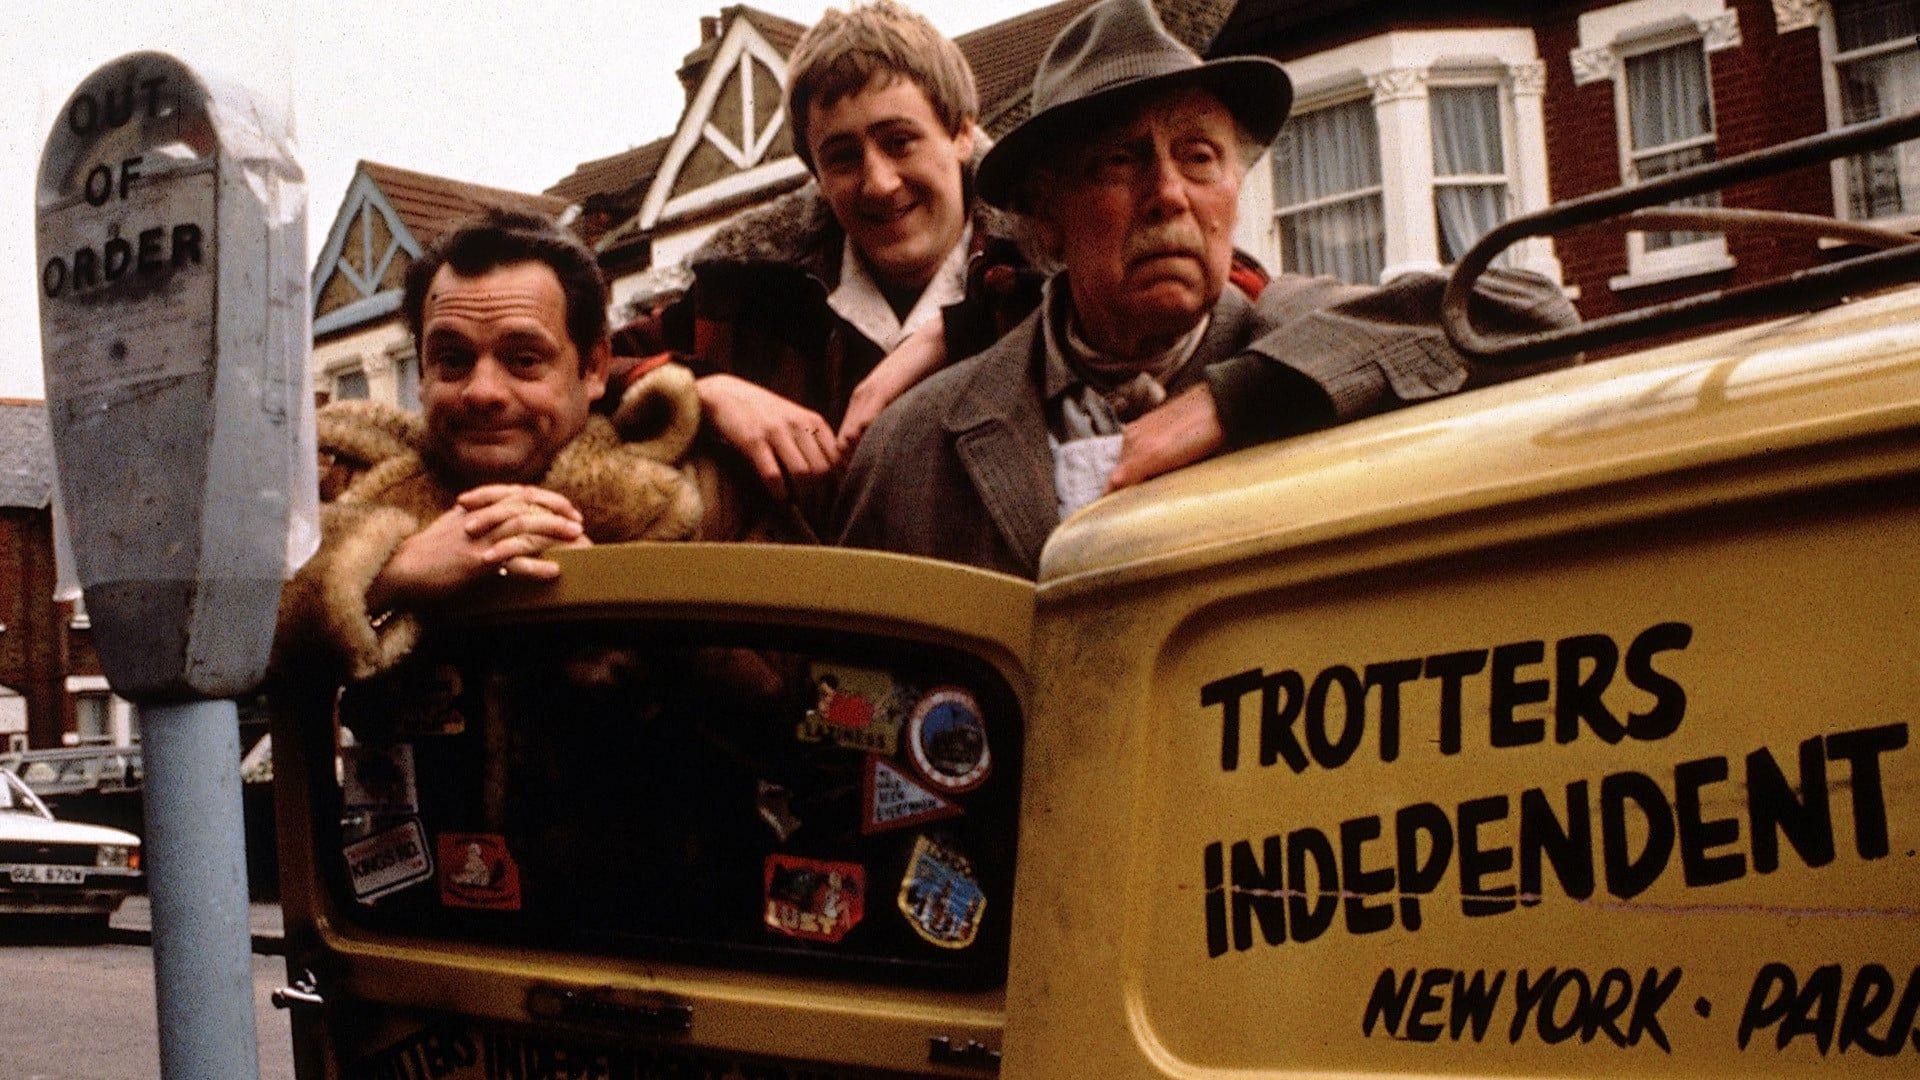 Only Fools And Horses (TV Series 1981 2003)